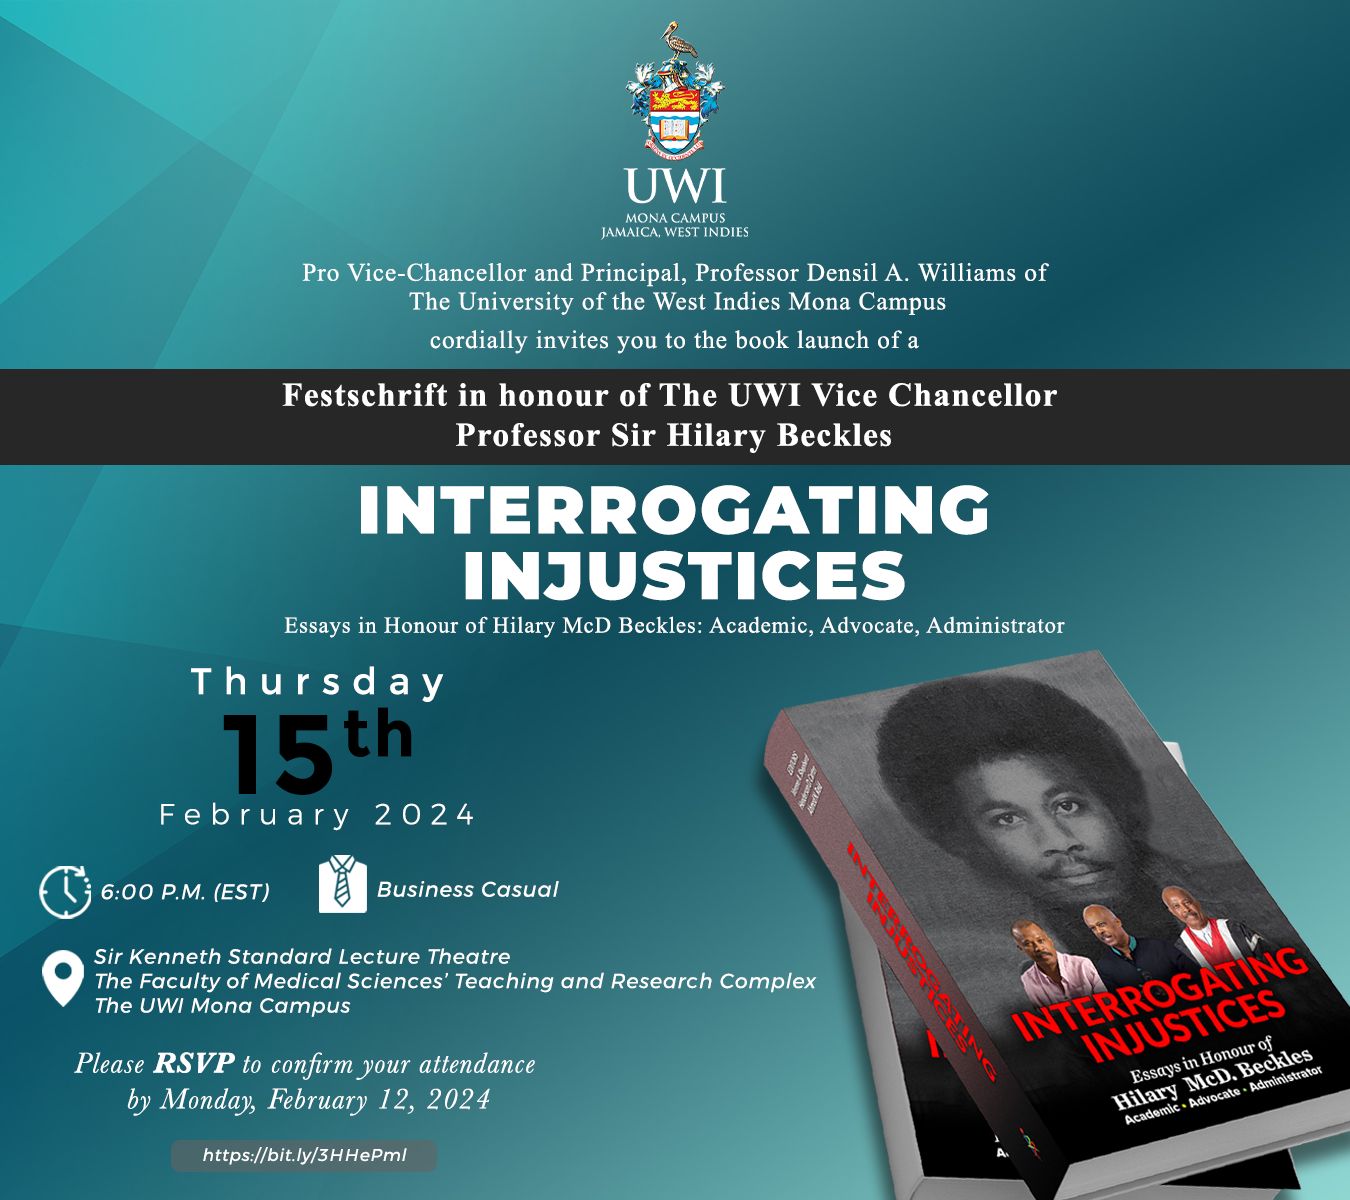 Save the date: The Book Launch of a Festschrift in honour of The UWI Vice Chancellor